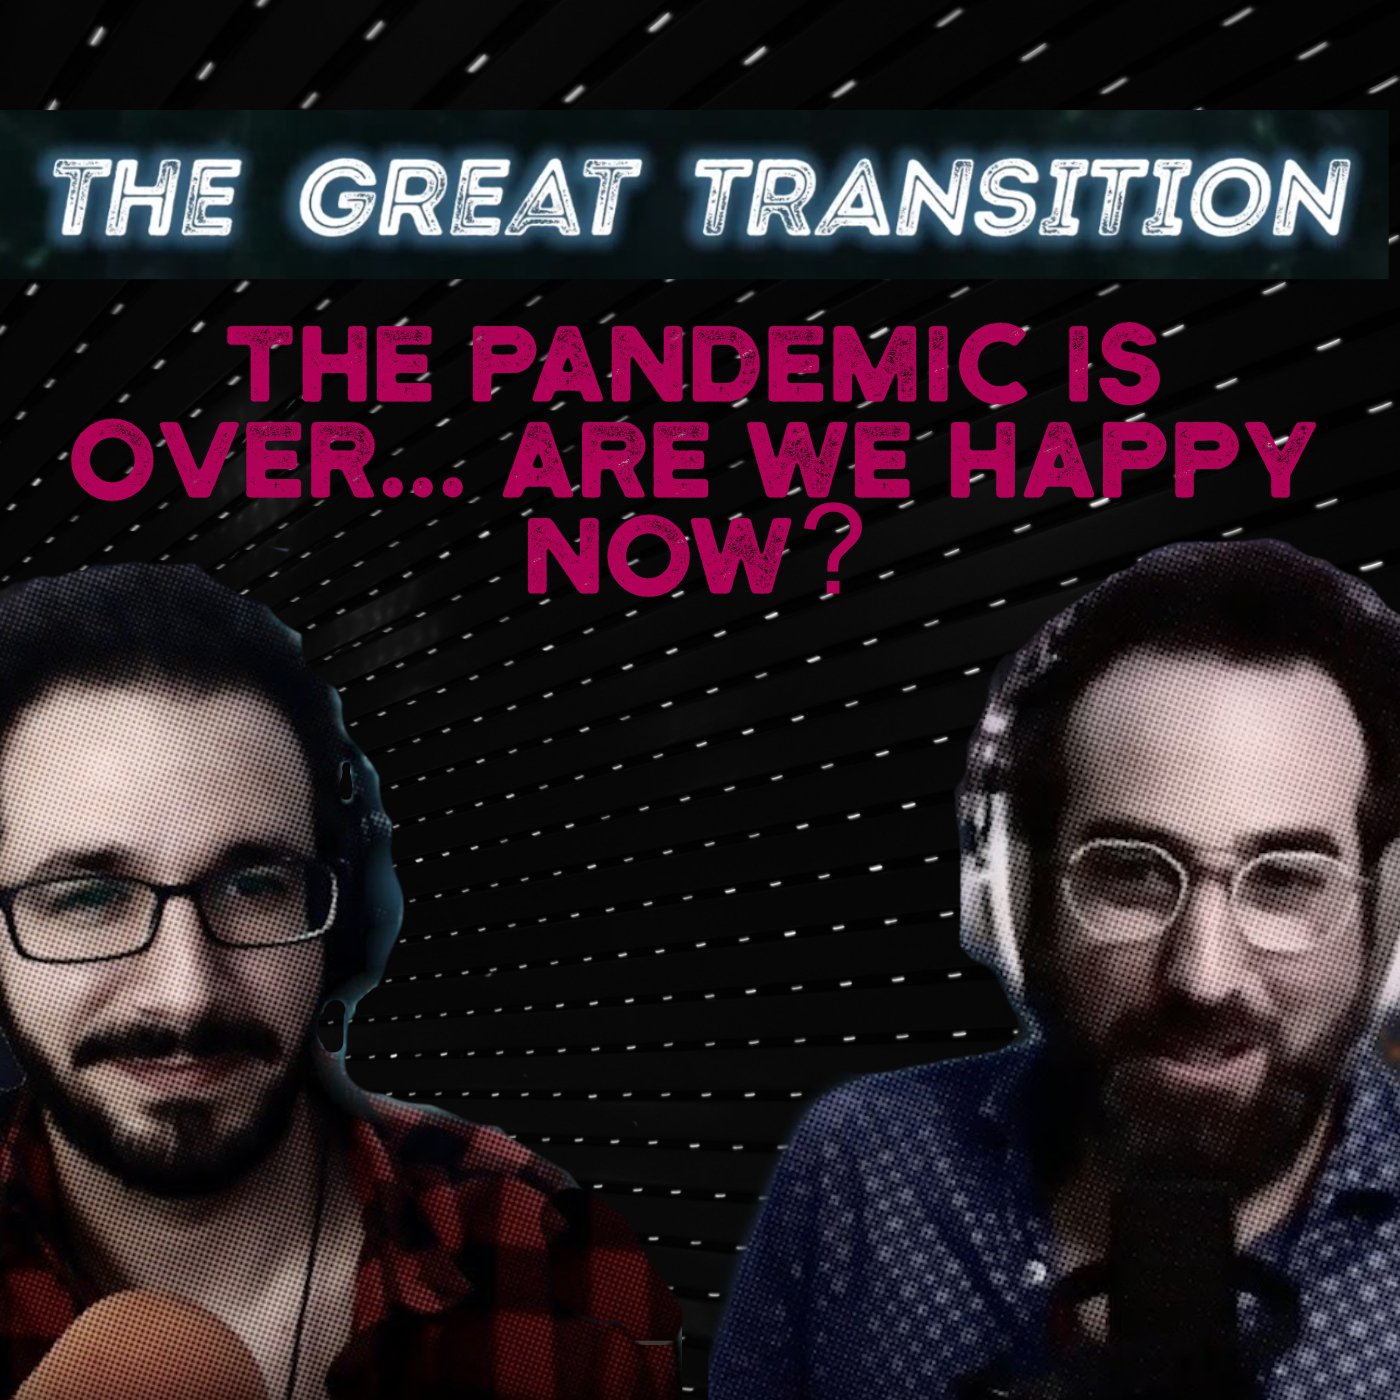 The Great Transition - The Pandemic Is Over... Are We Happy Now?